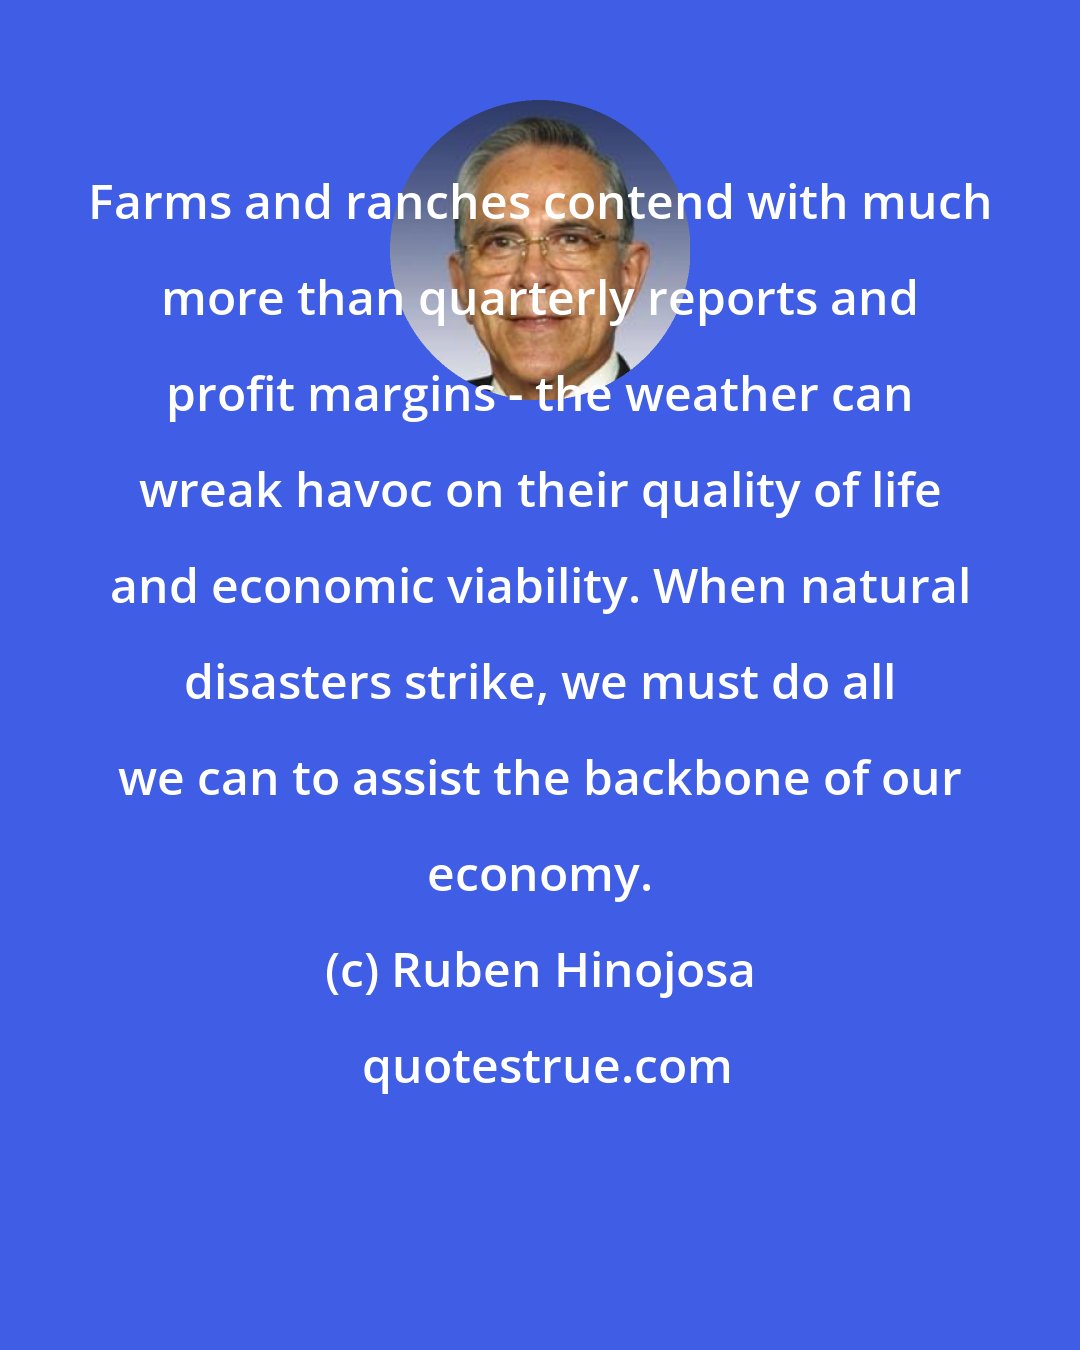 Ruben Hinojosa: Farms and ranches contend with much more than quarterly reports and profit margins - the weather can wreak havoc on their quality of life and economic viability. When natural disasters strike, we must do all we can to assist the backbone of our economy.